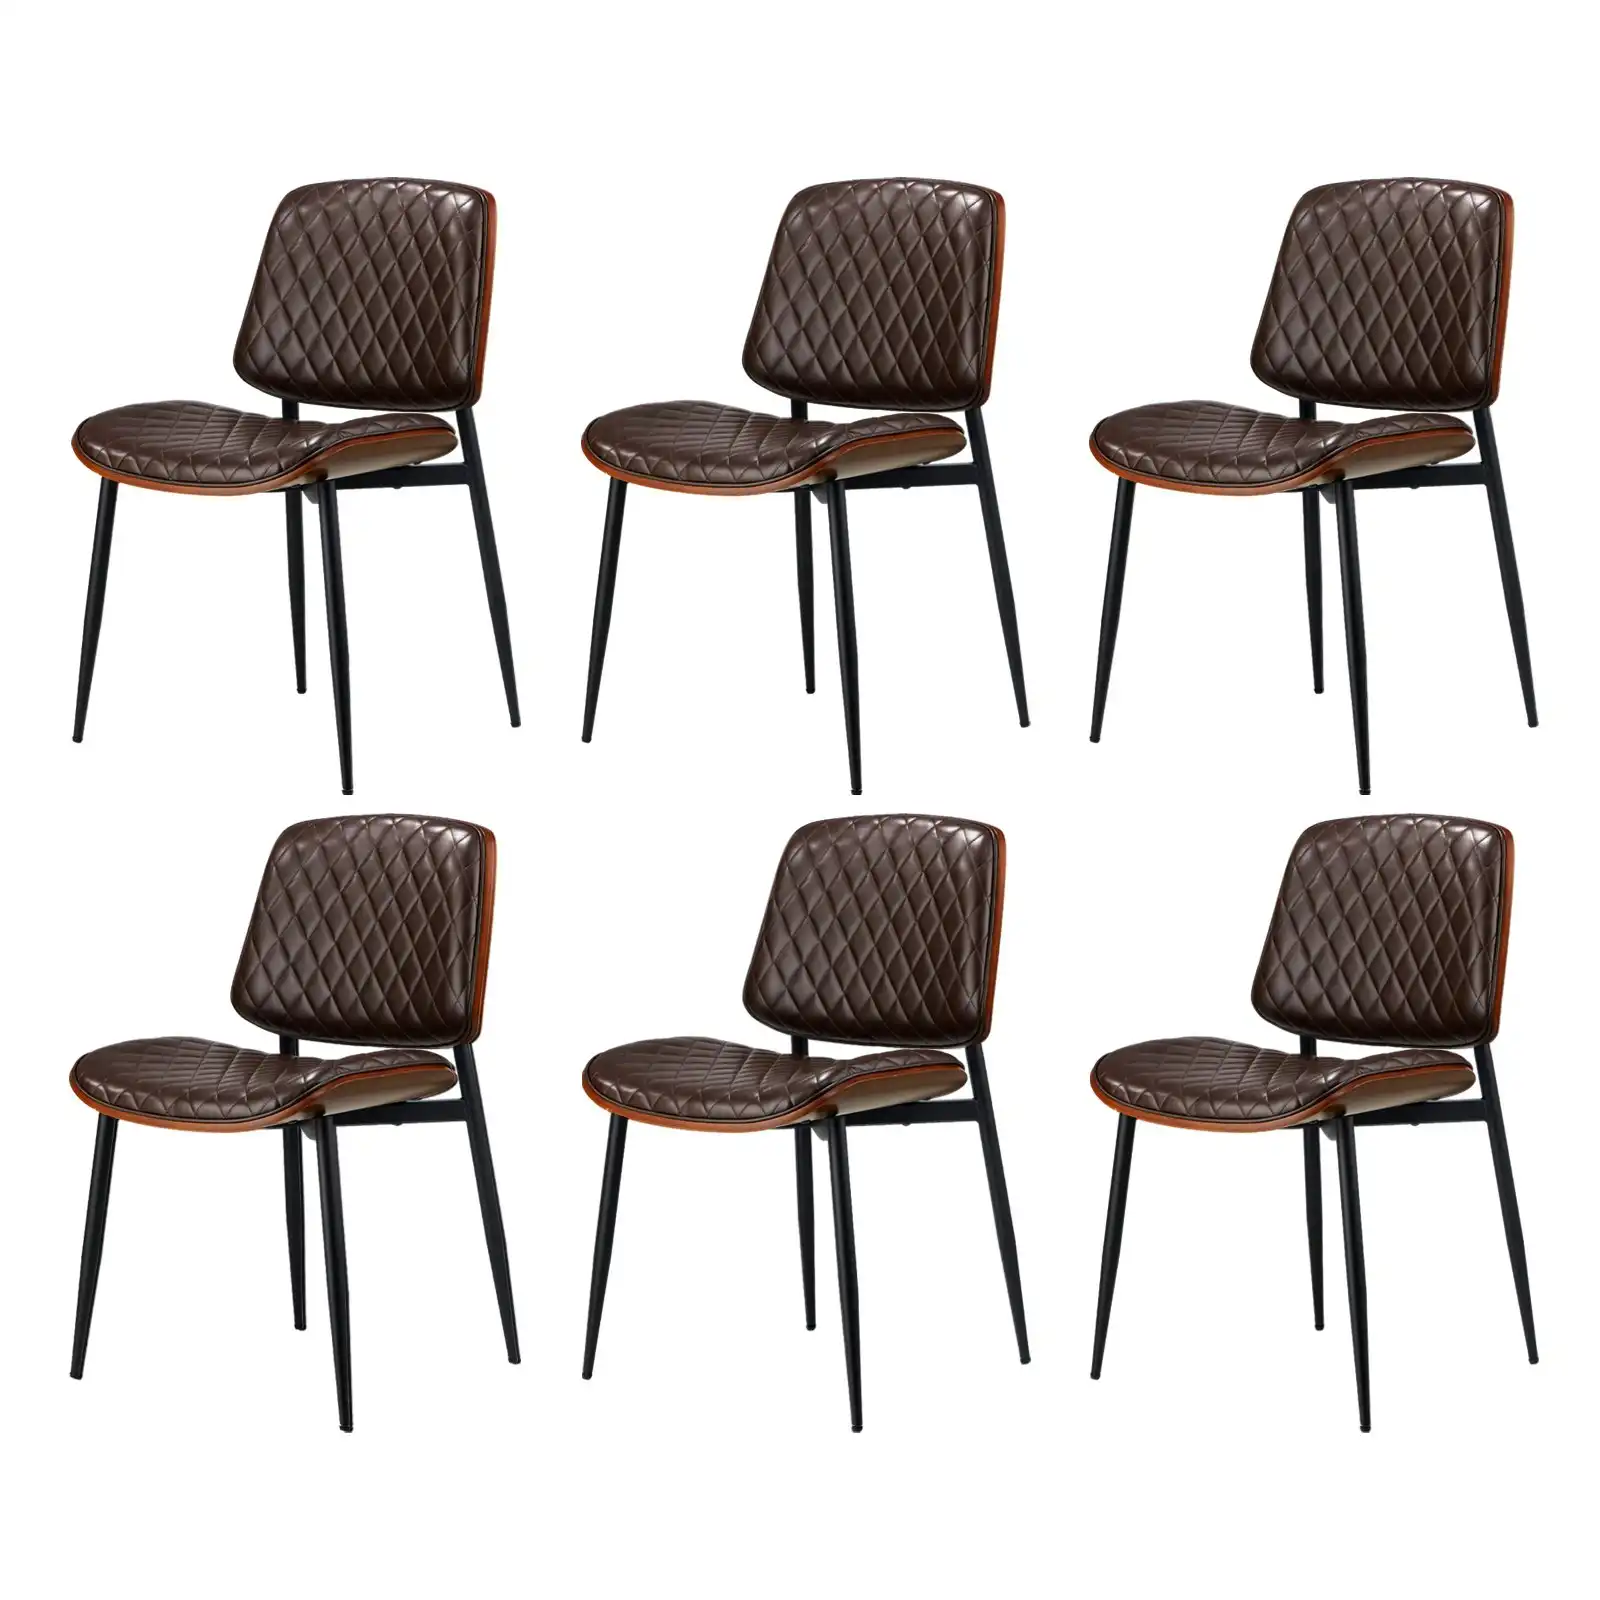 Oikiture 6x Dining Chairs Retro Faux Leather Solid Beech Wood Metal Legs Walnut